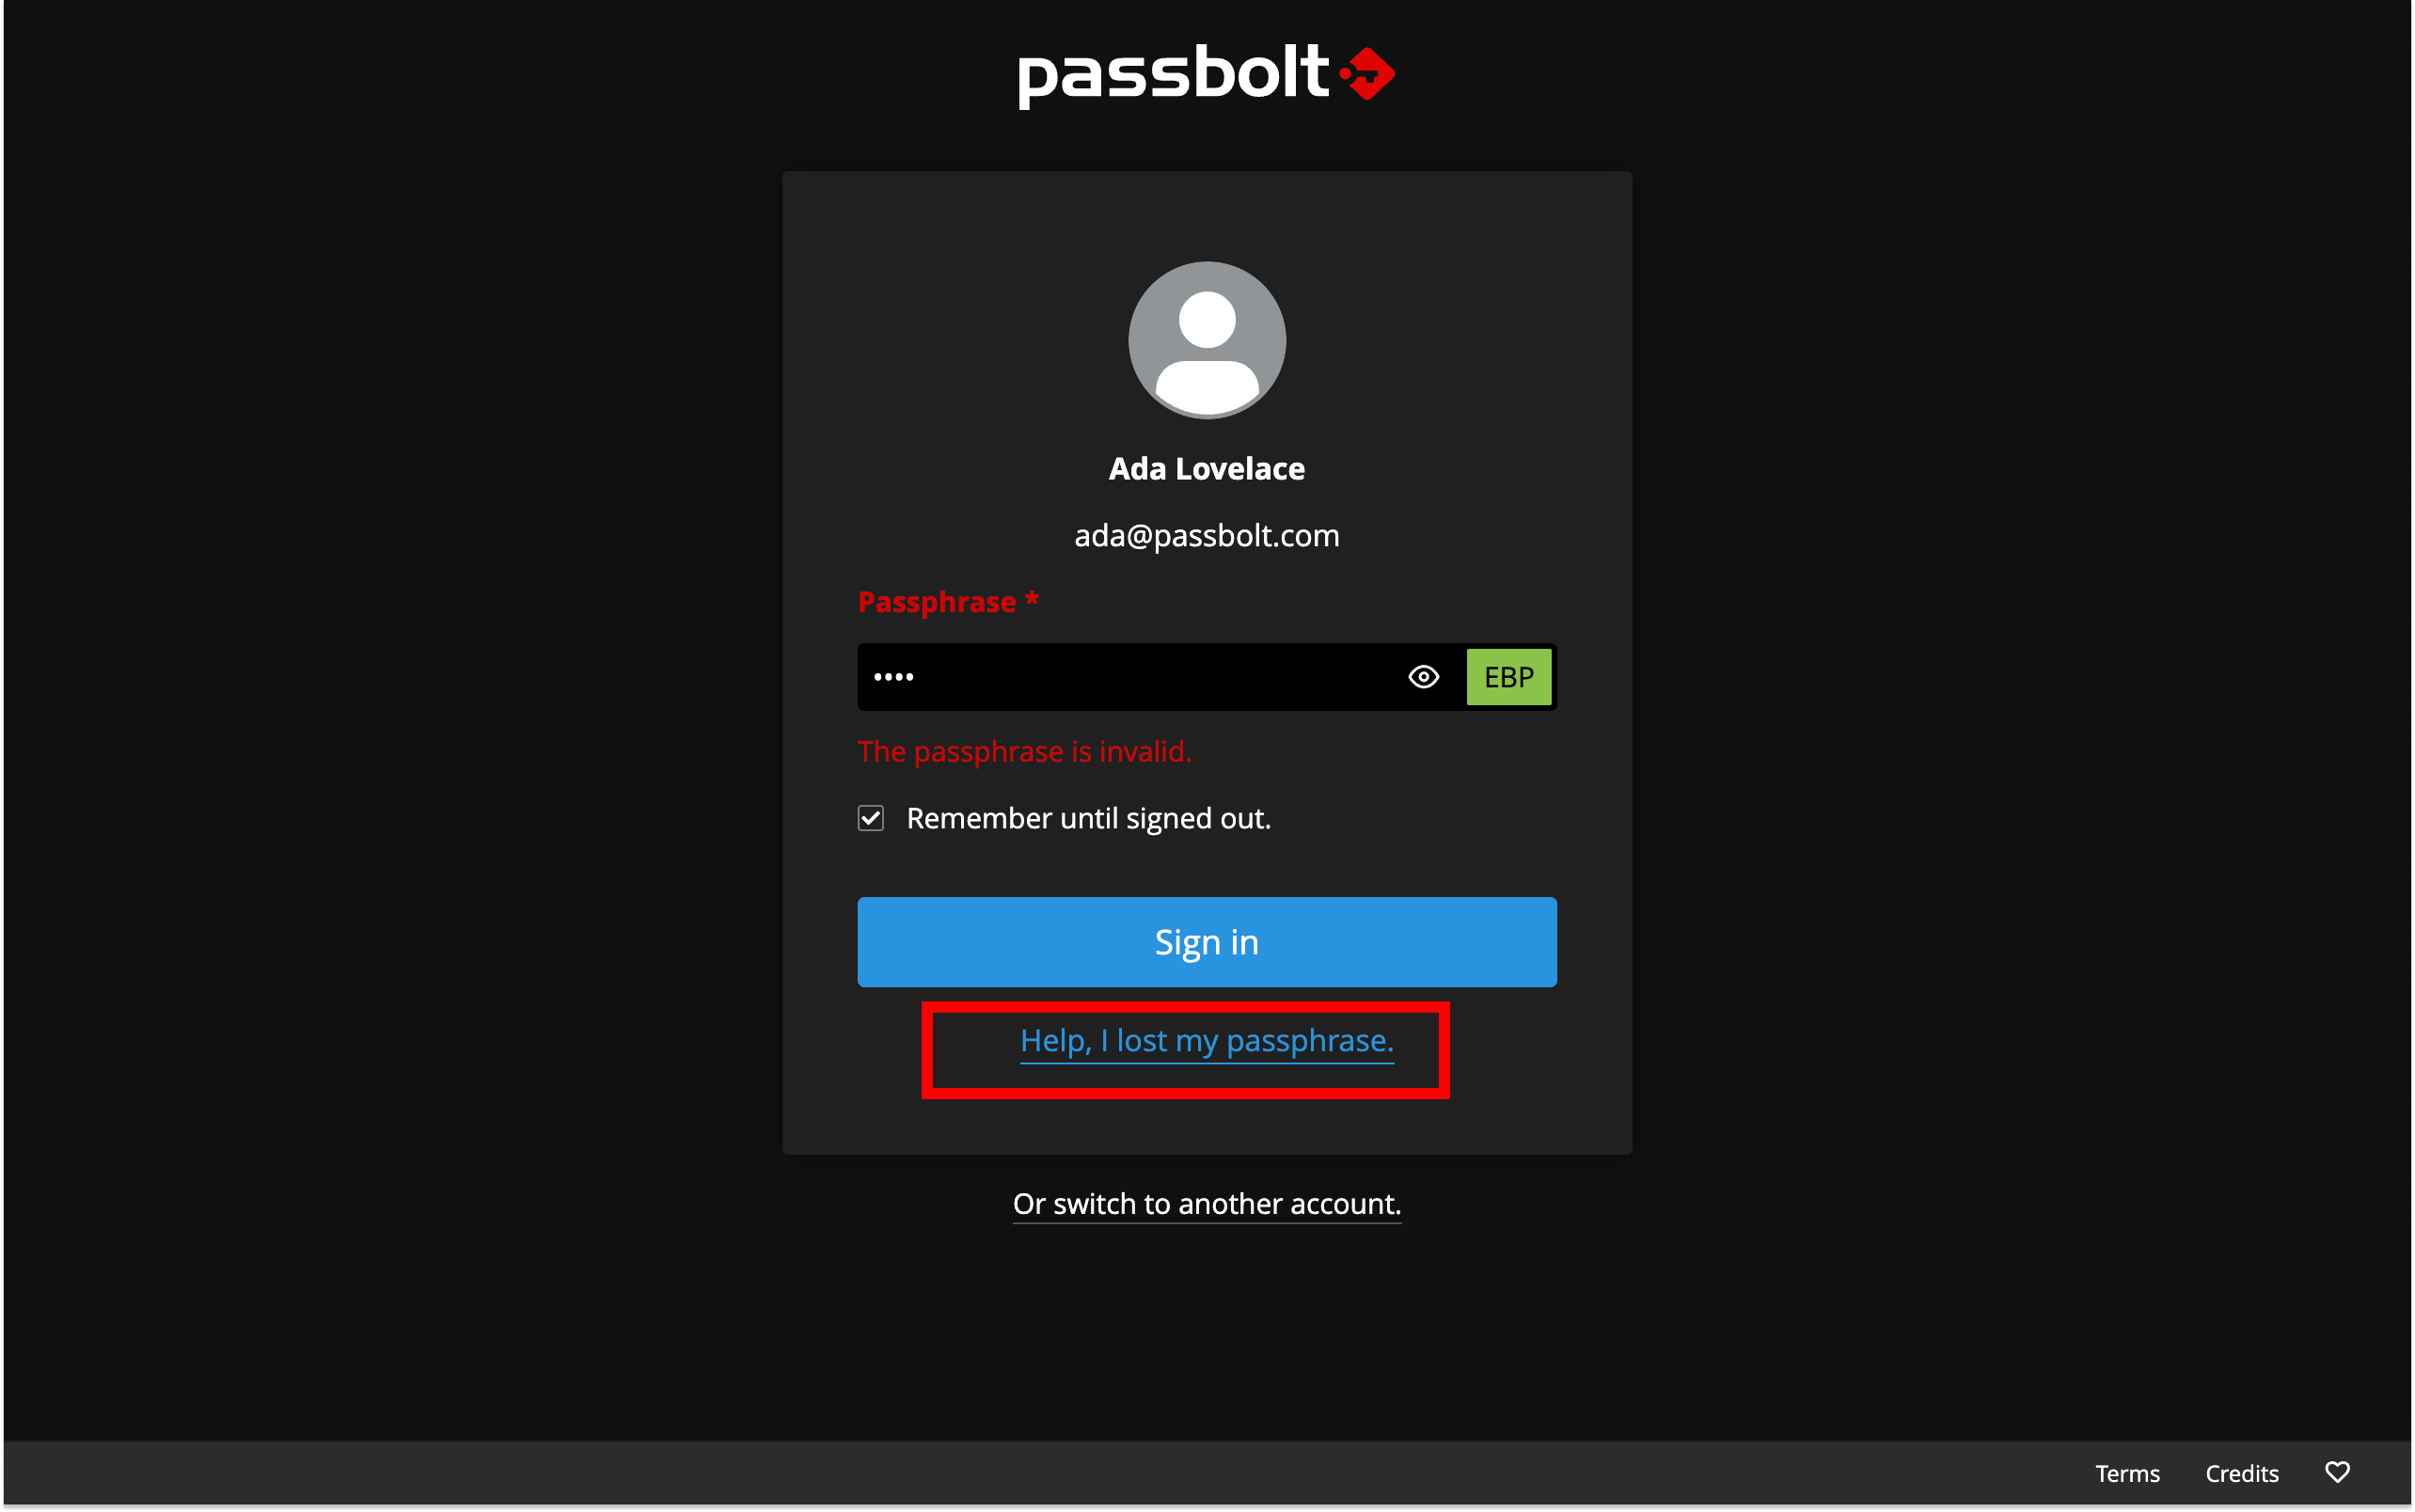 Login screen with lost passphrase